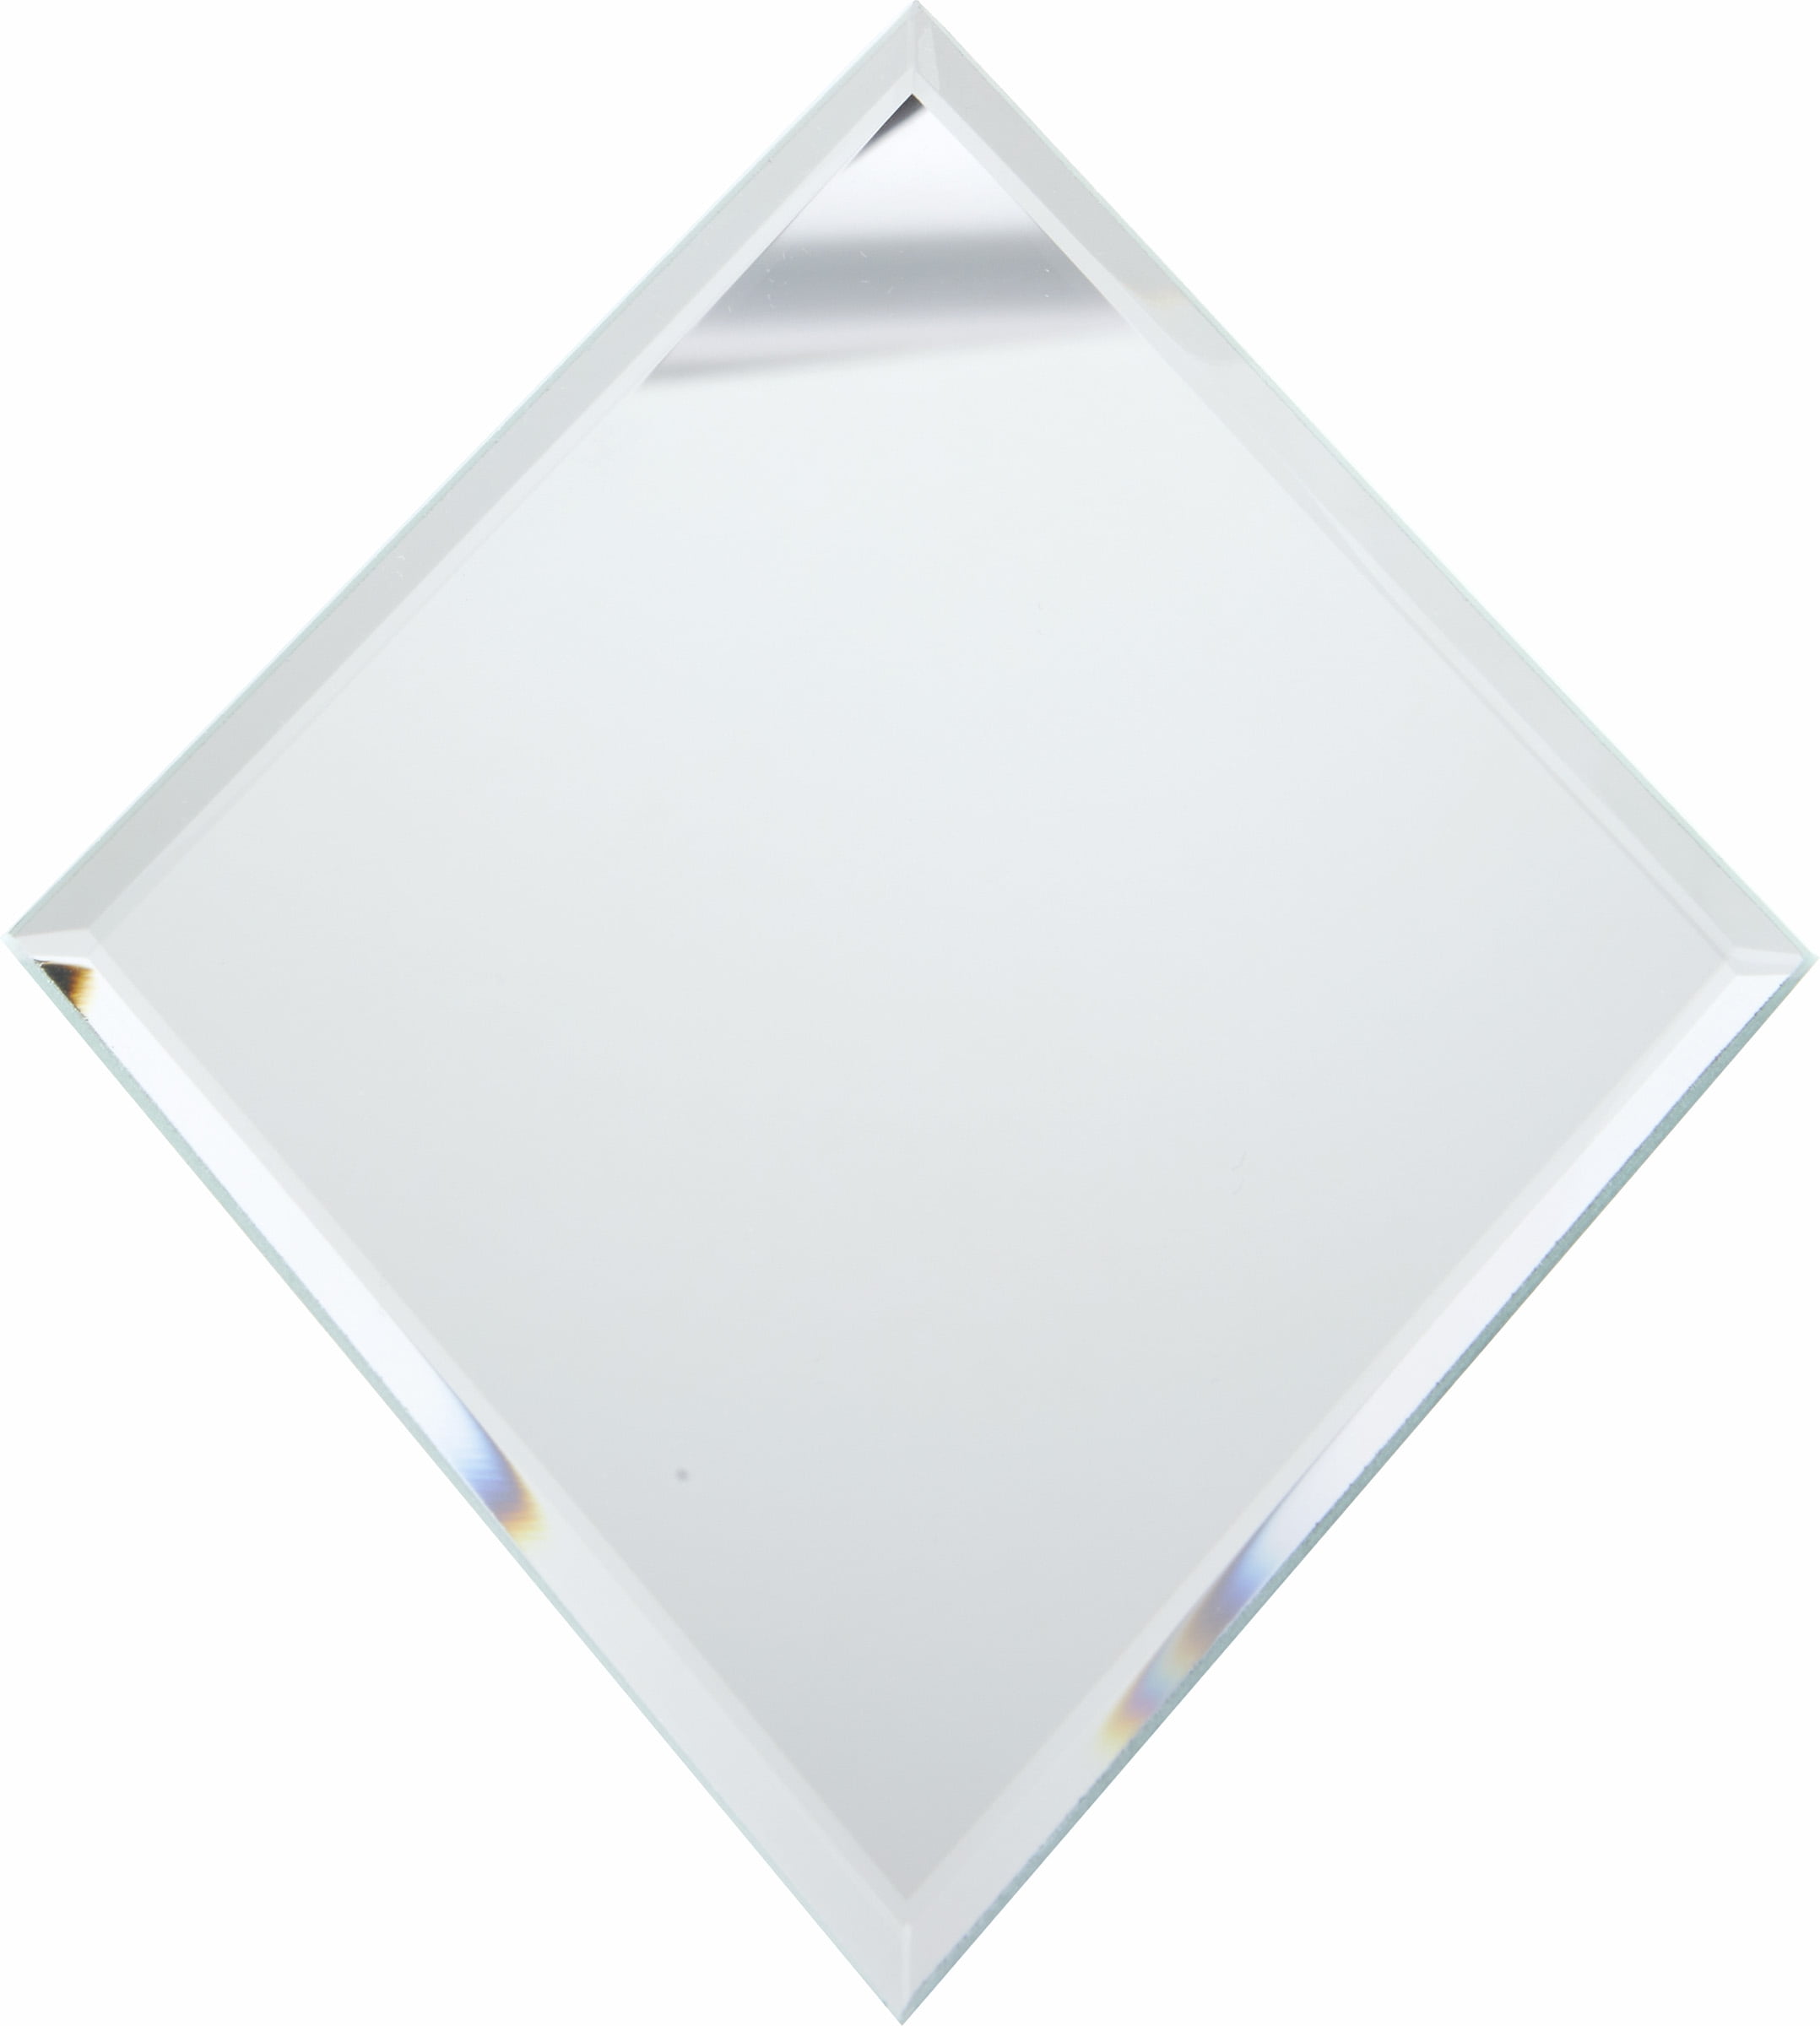 3 inch x 3 inch Pack of 6 Plymor Square 3mm Beveled Glass Mirror 